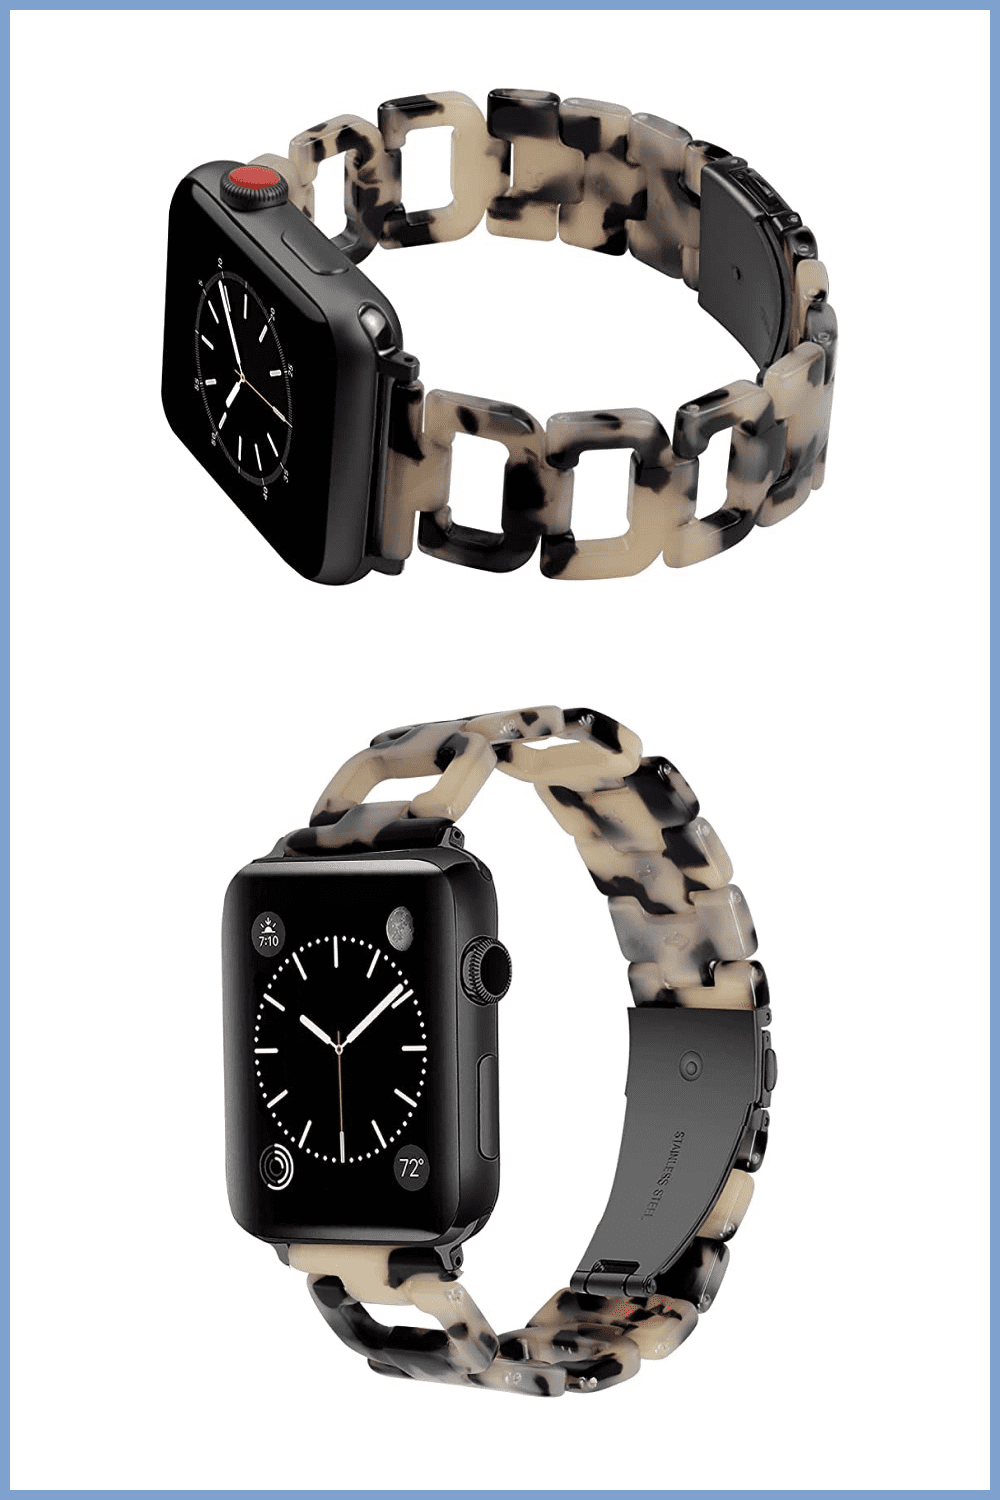 Apple Watches with fancy multicolor band.